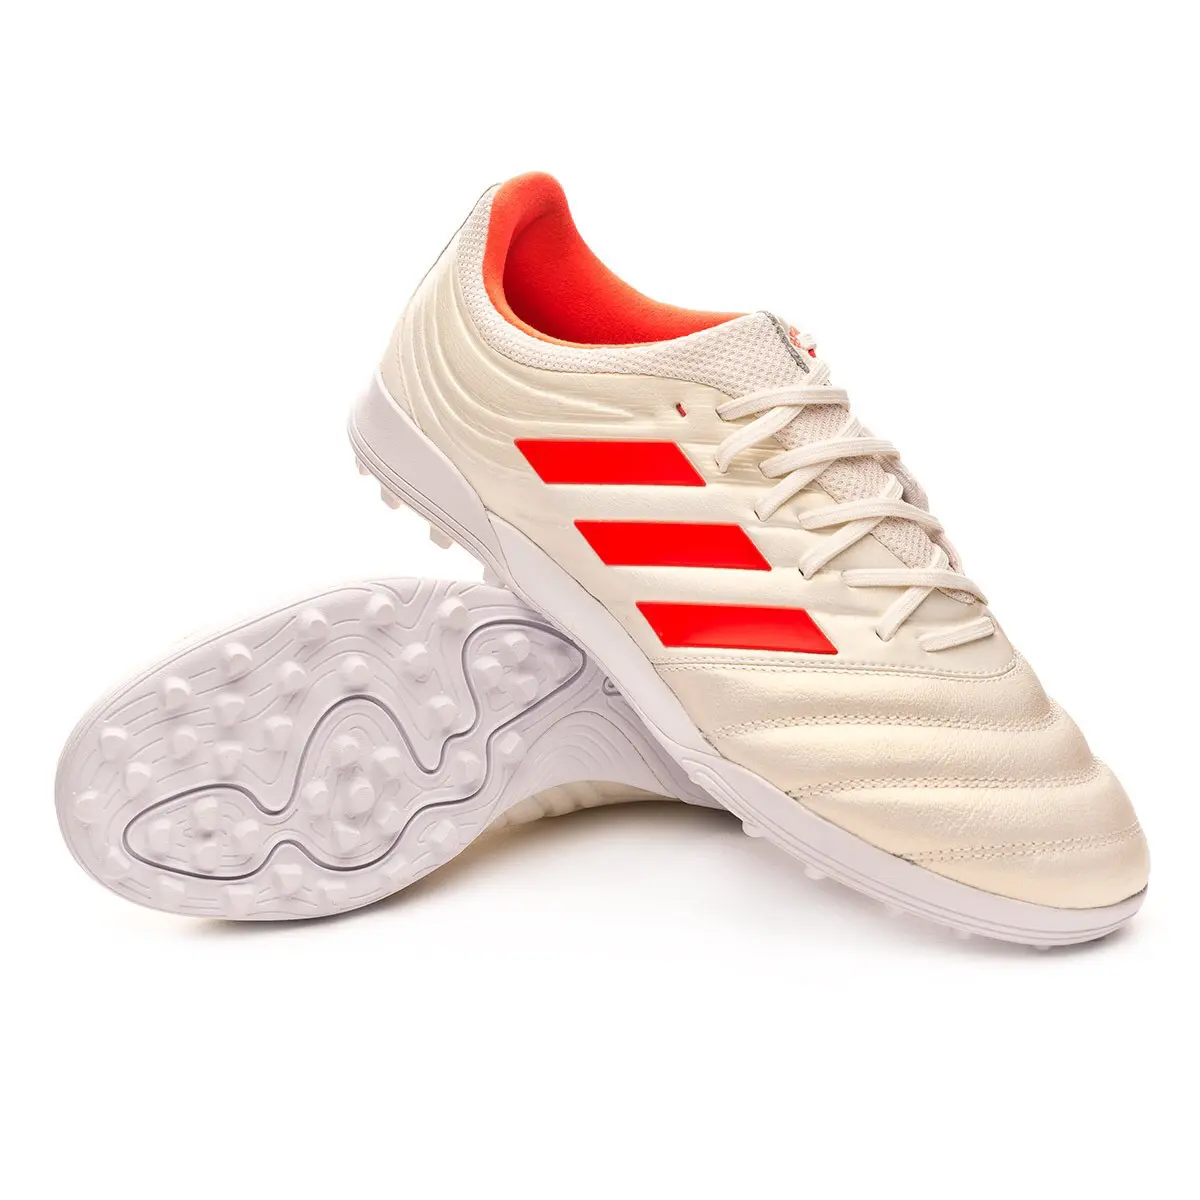 Adidas Copa 19.3 Turf - The Factory